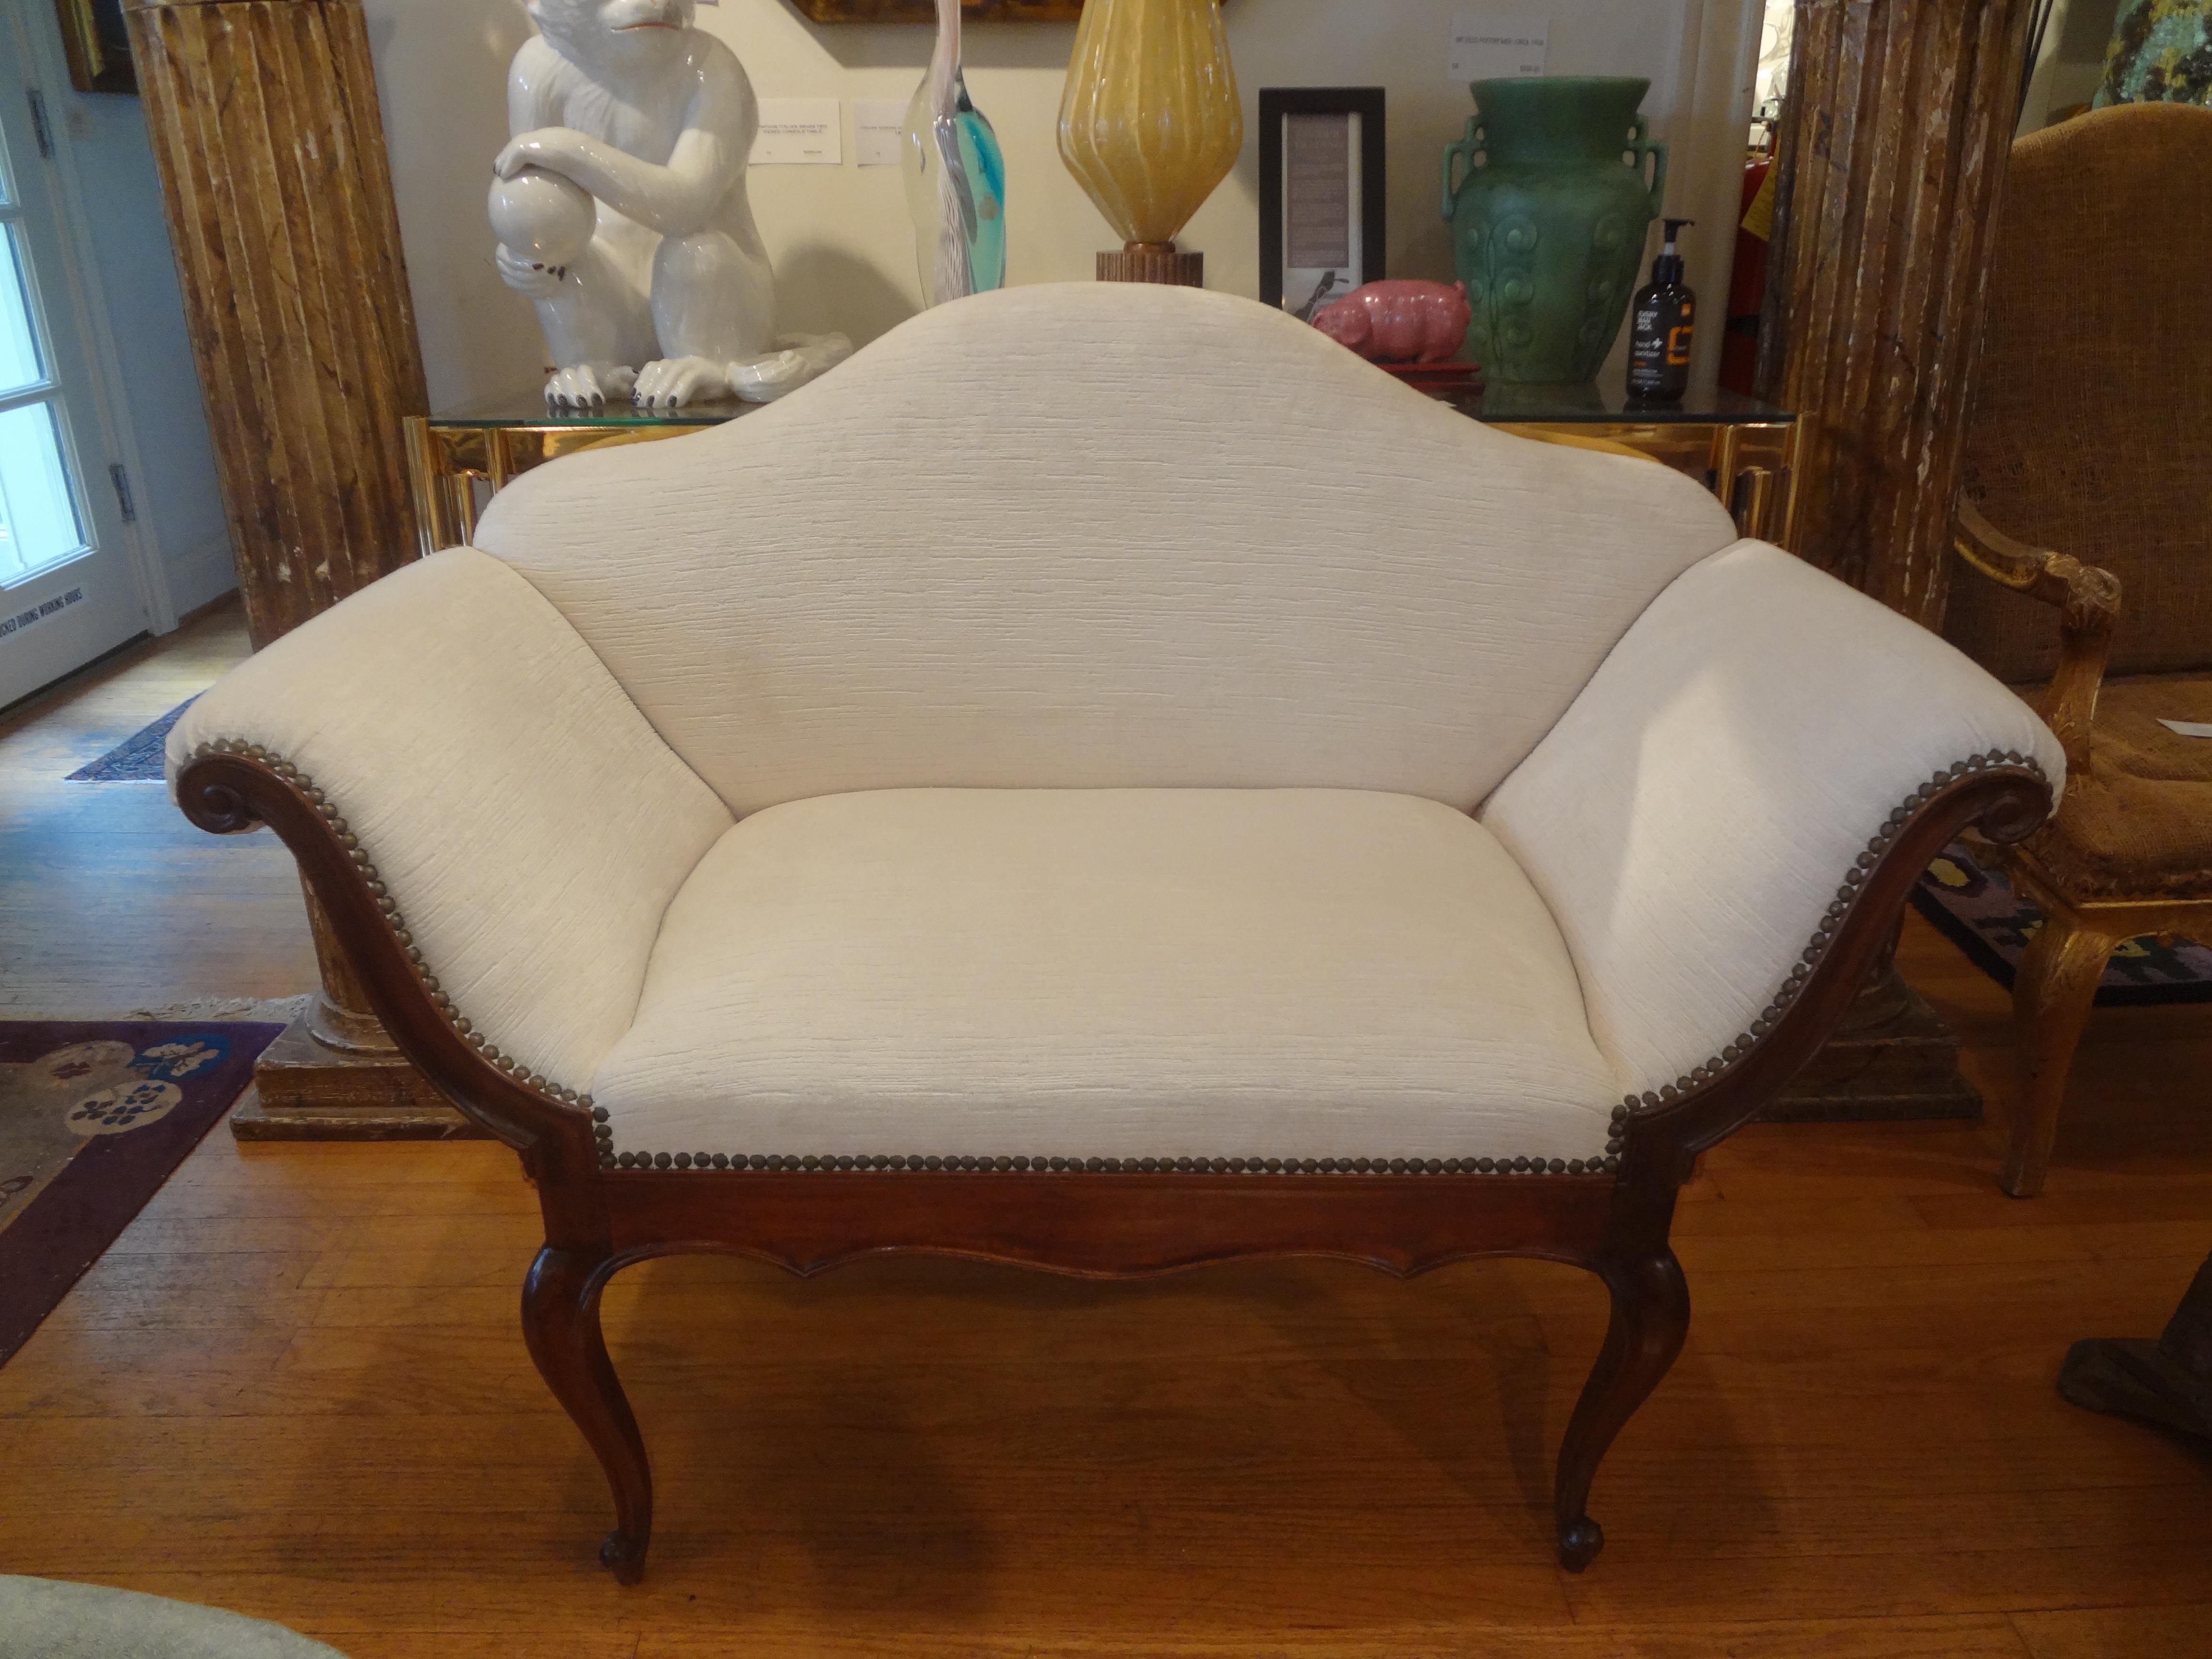 19th century Venetian loveseat. This antique Venetian walnut loveseat, canape or divanetto has a beautiful shapely back, scrolled arms and cabriole legs. This charming loveseat has been professionally upholstered in high quality cream colored